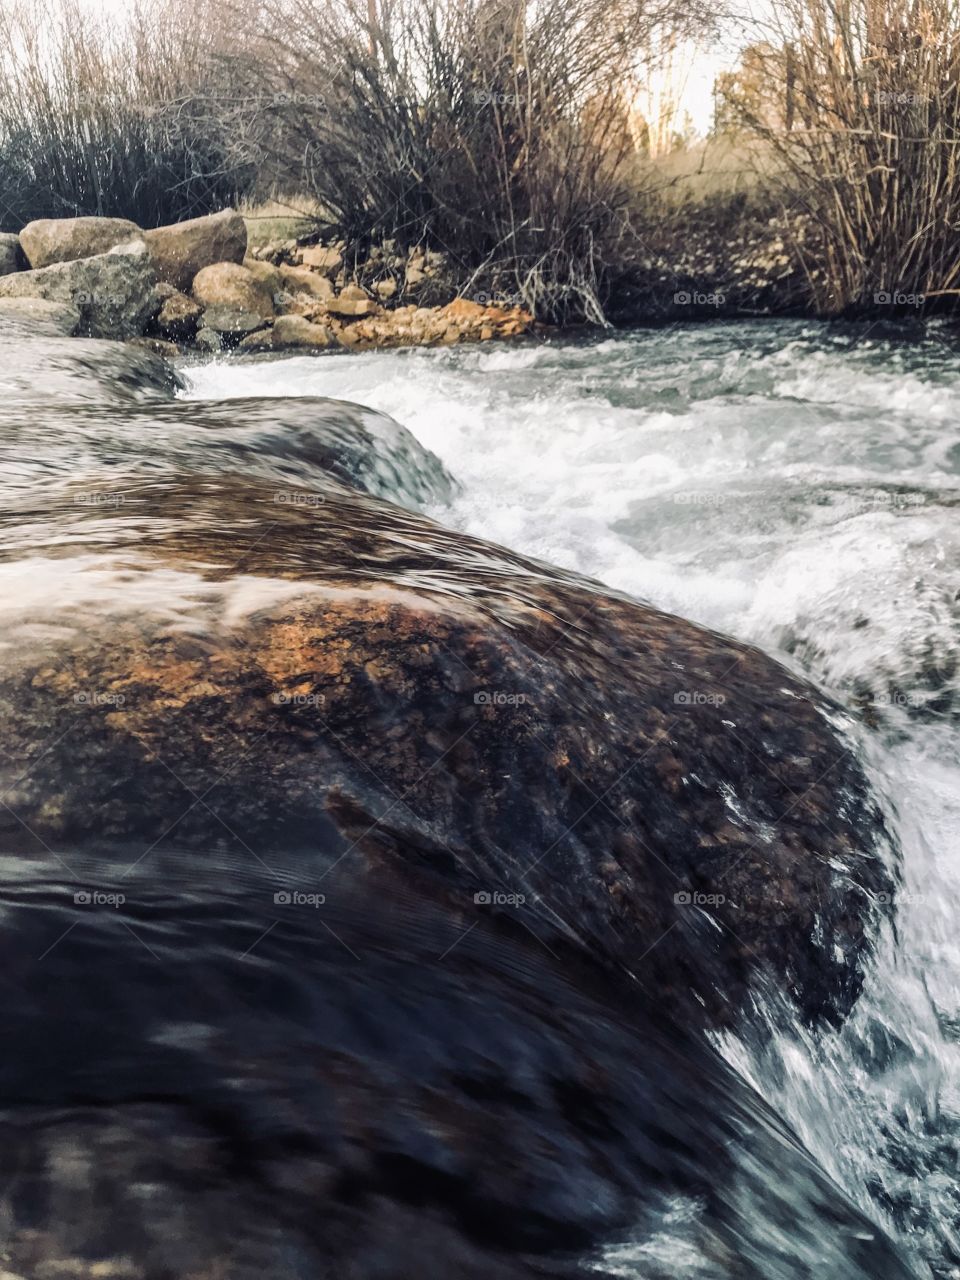 Water flowing softly over the rocks of Pine Creek River in Pinedale, Wyoming 